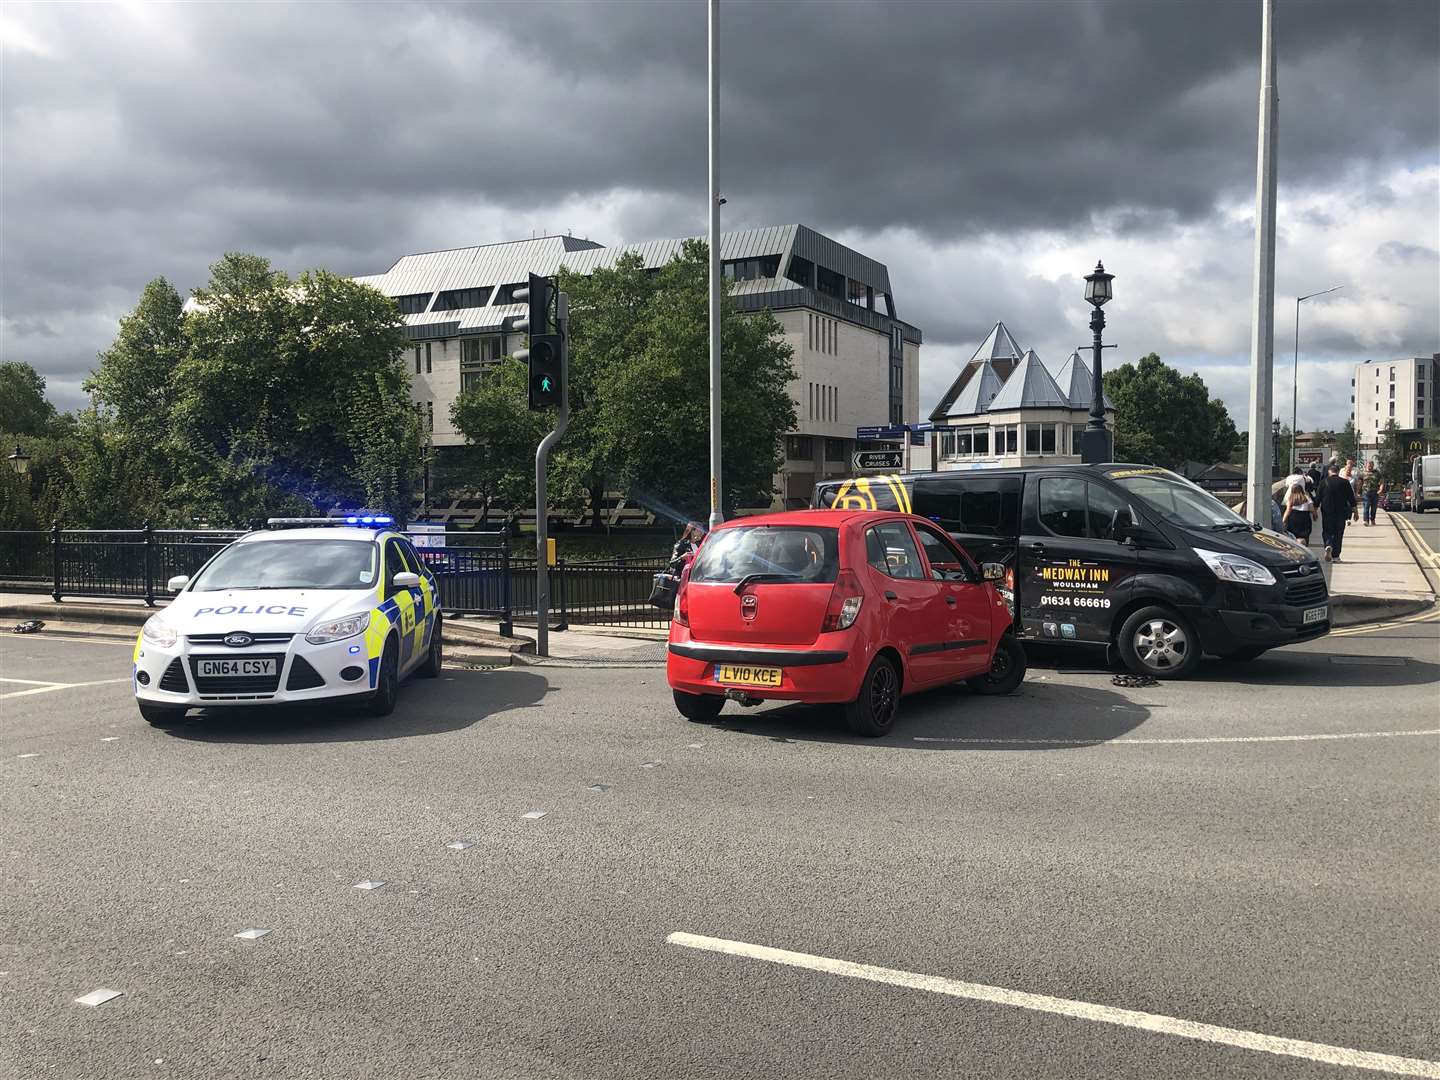 The crash took place at the busy junction by Bishops Way and High Street, Maidstone